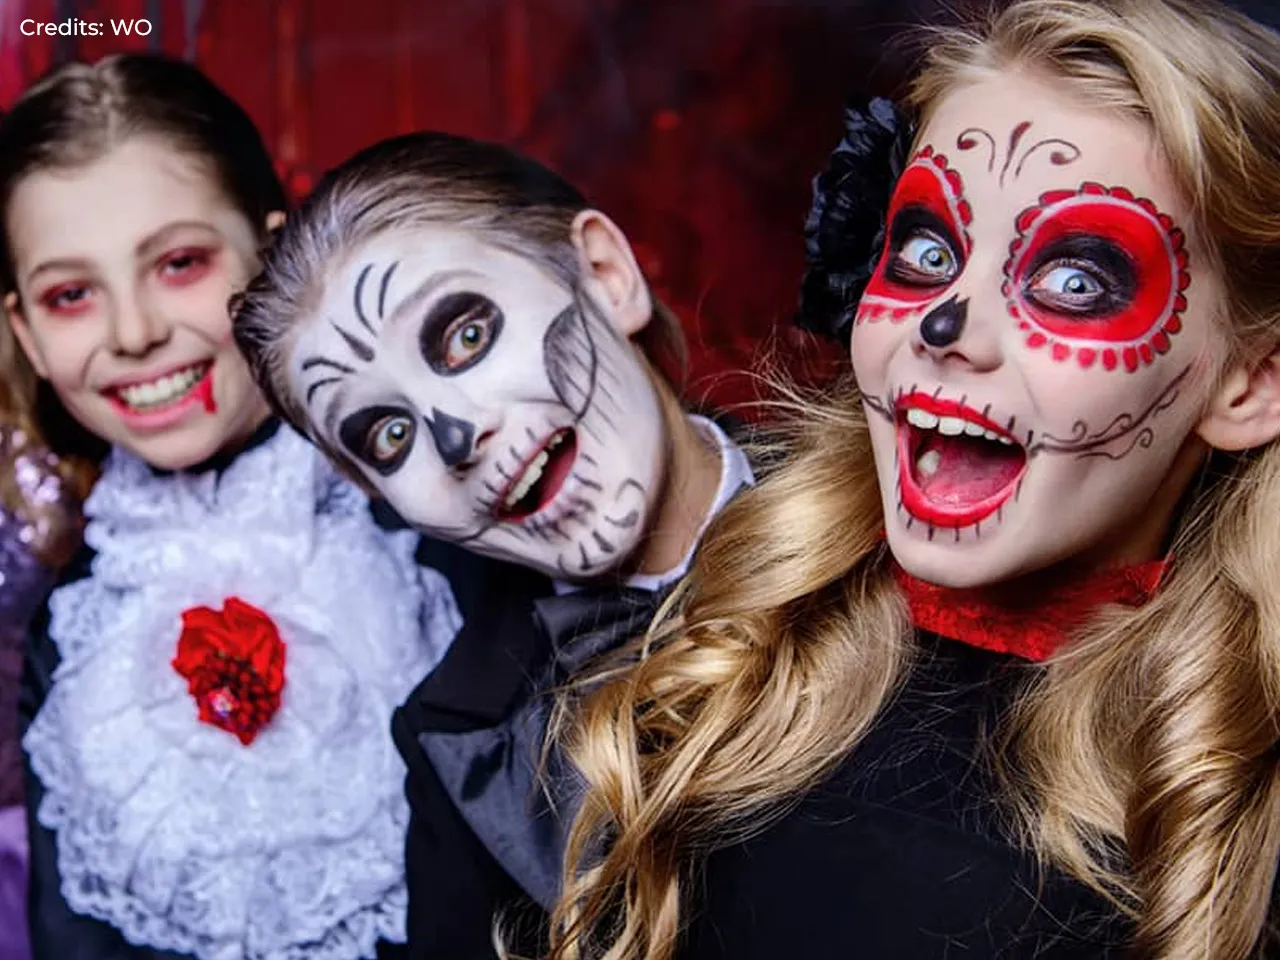 Places to rent and buy costumes for Halloween in Bangalore